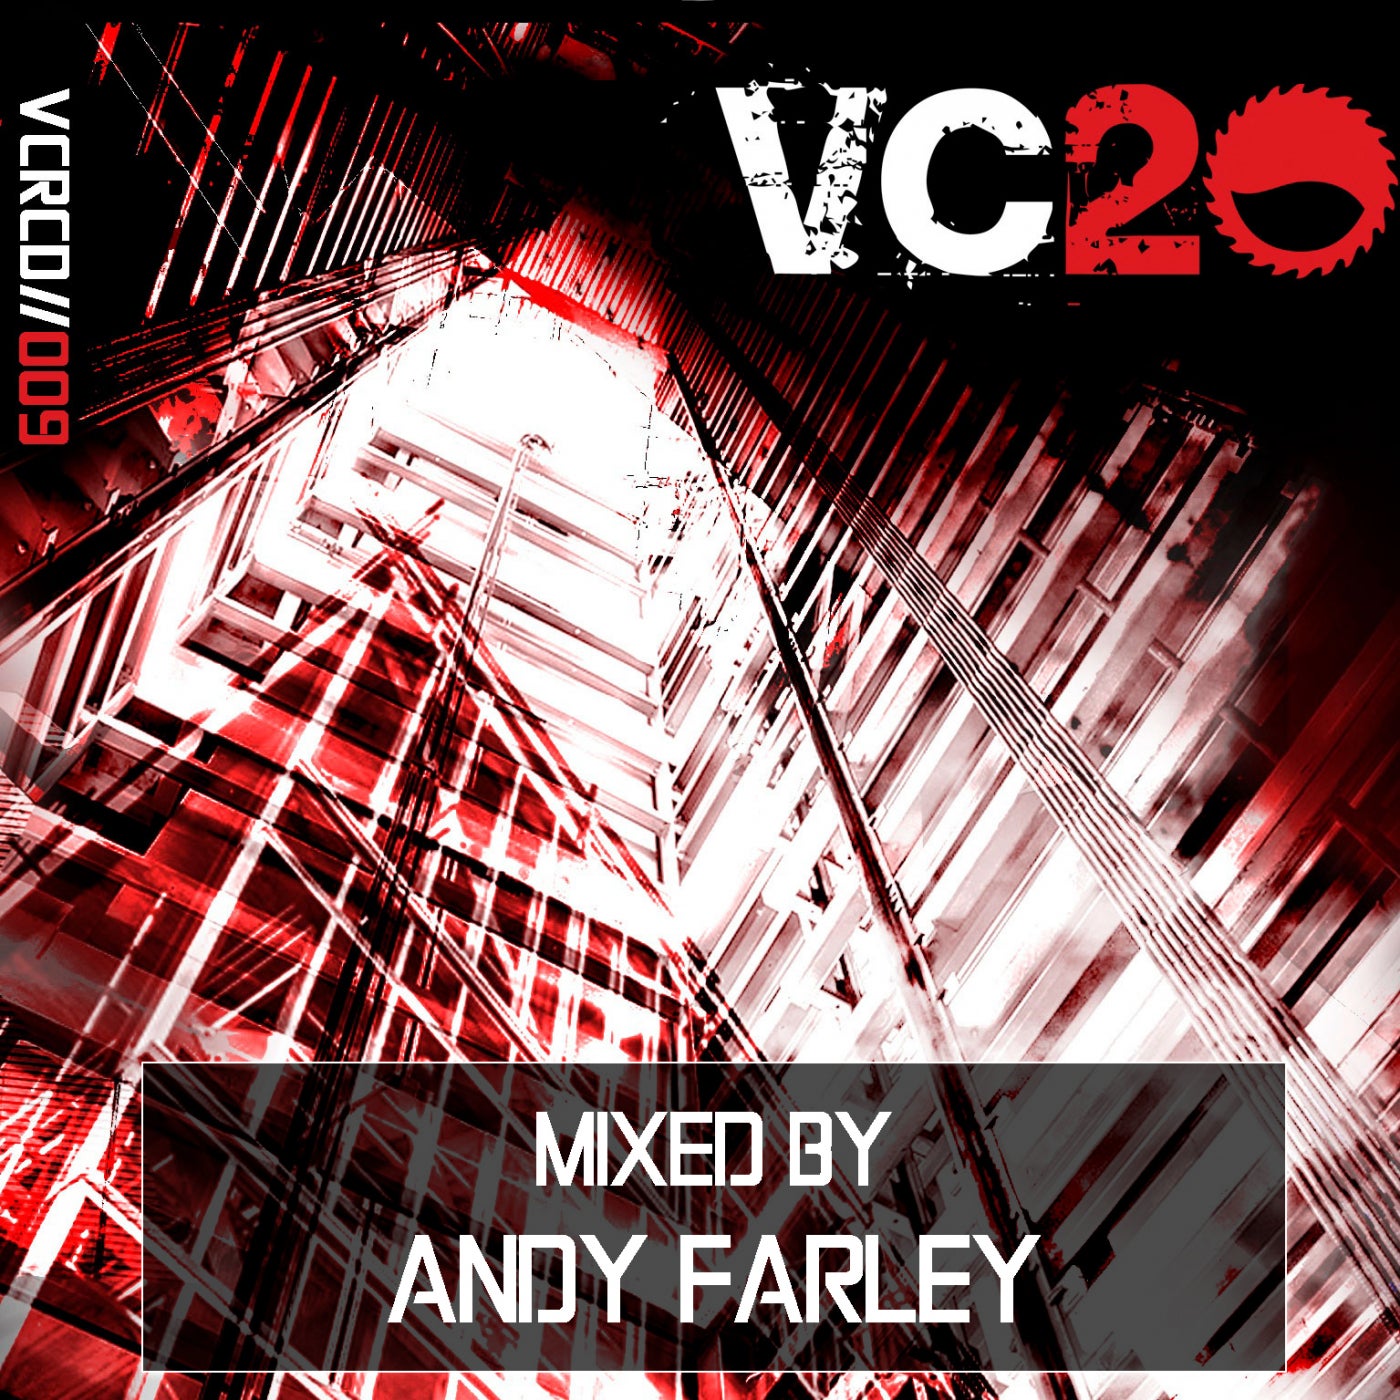 VC 20 - Mixed by Andy Farley